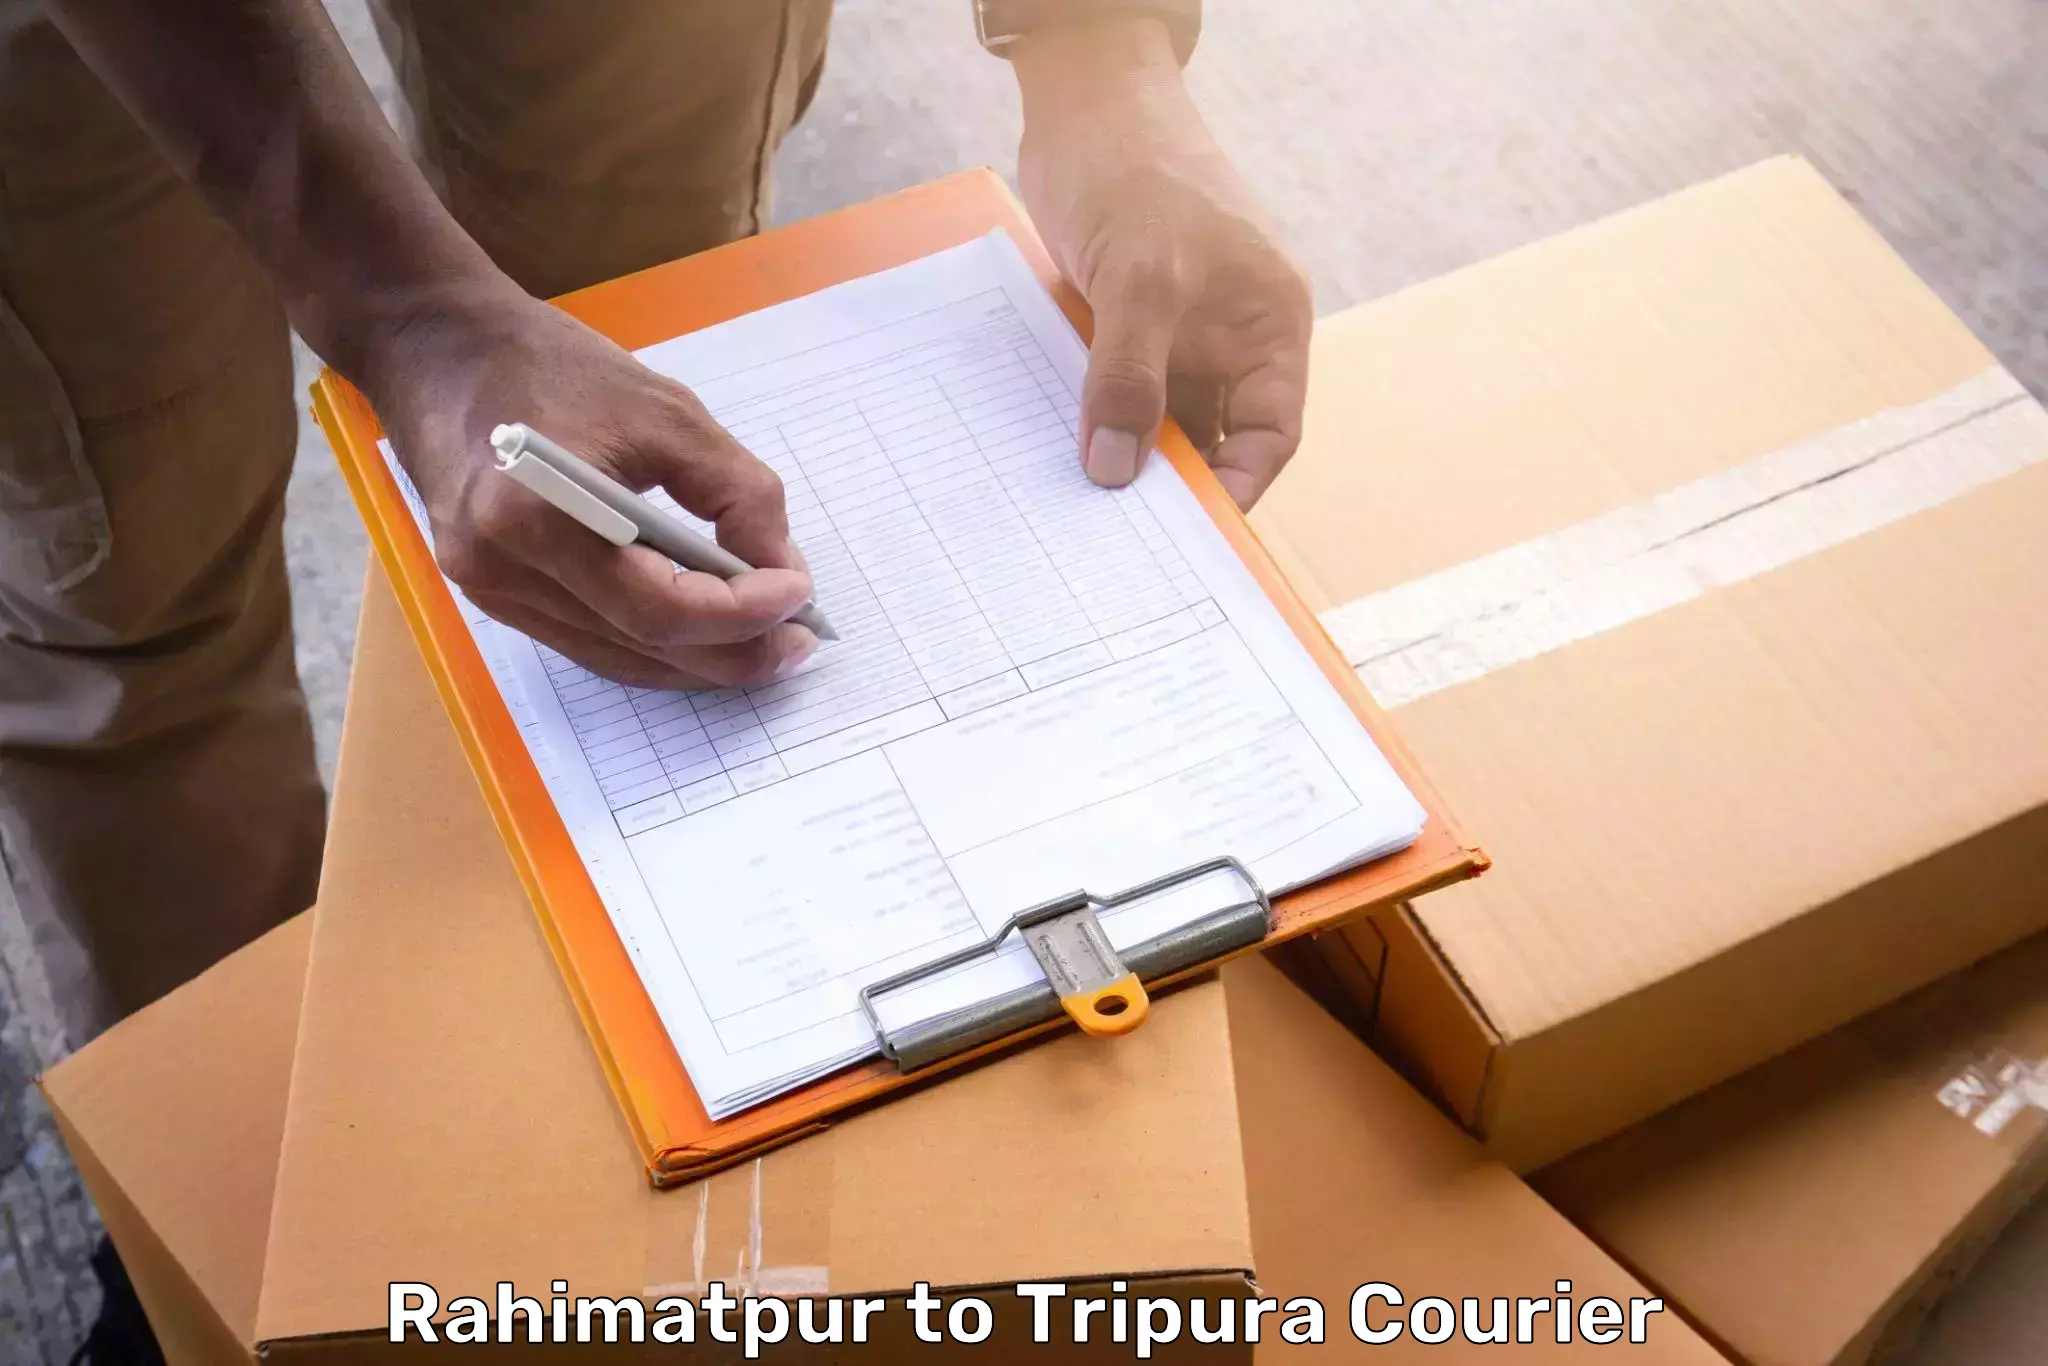 Luggage delivery network Rahimatpur to Amarpur